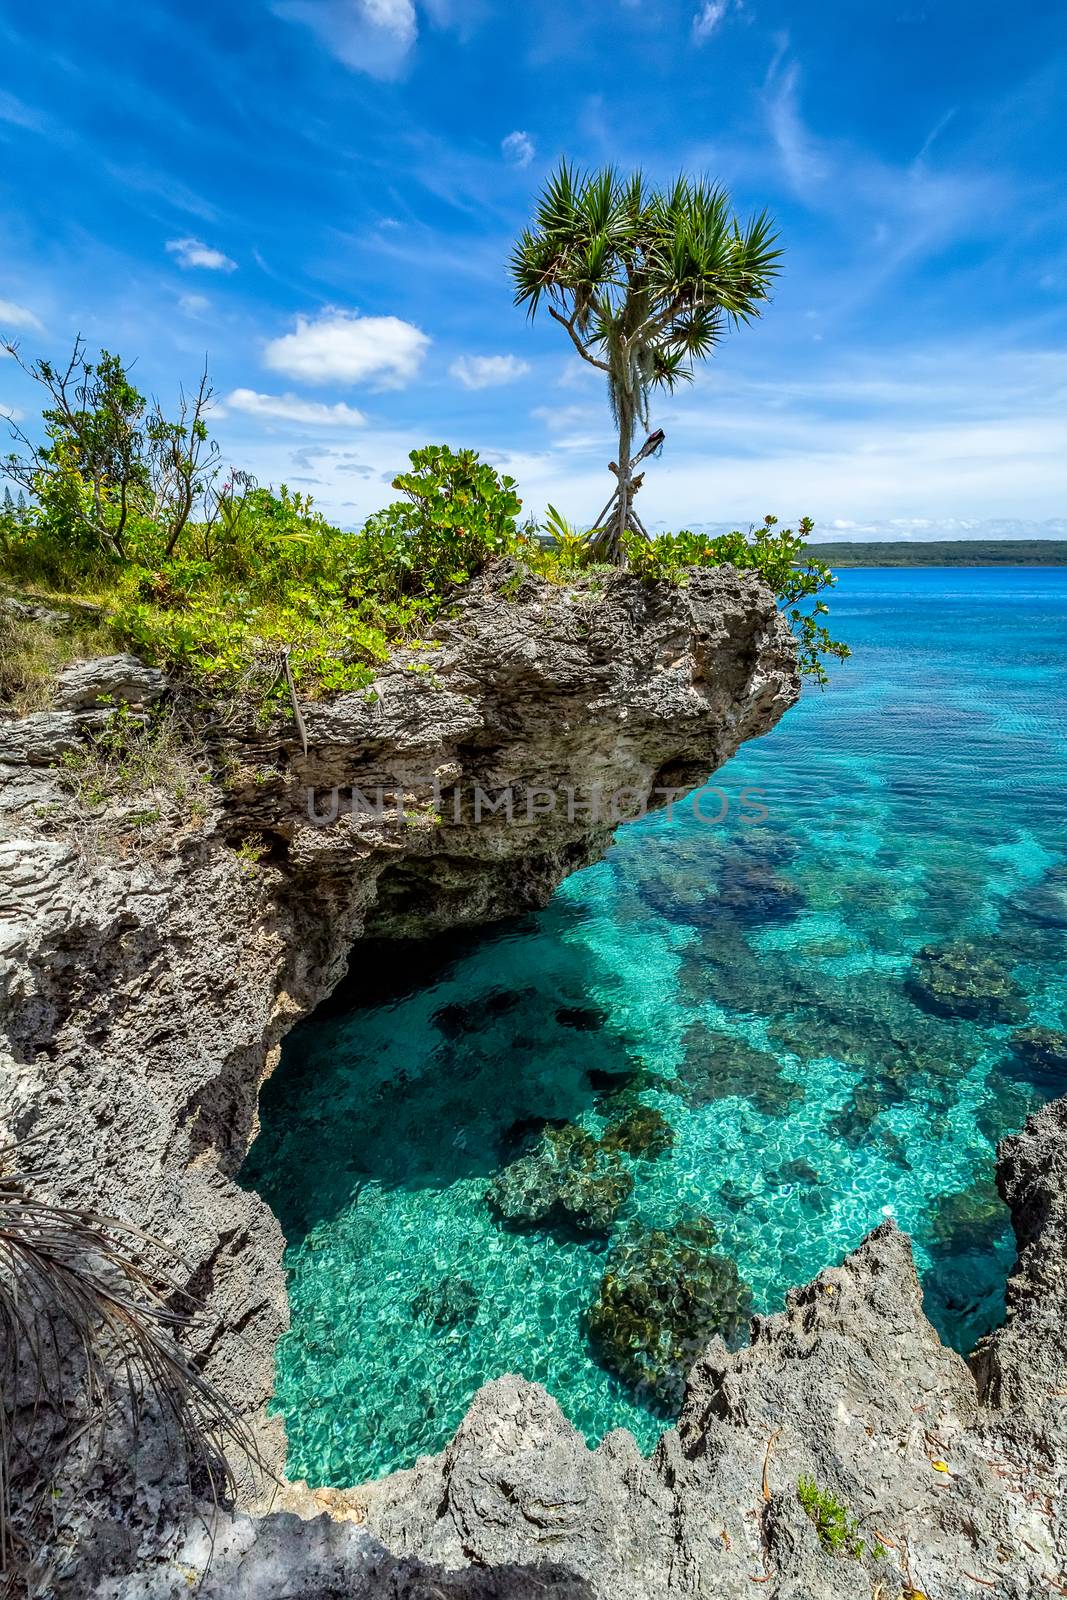 View of a single tree on top of a curved cliff with beautiful turquoise waters on the Island of Mare, New Caledonia